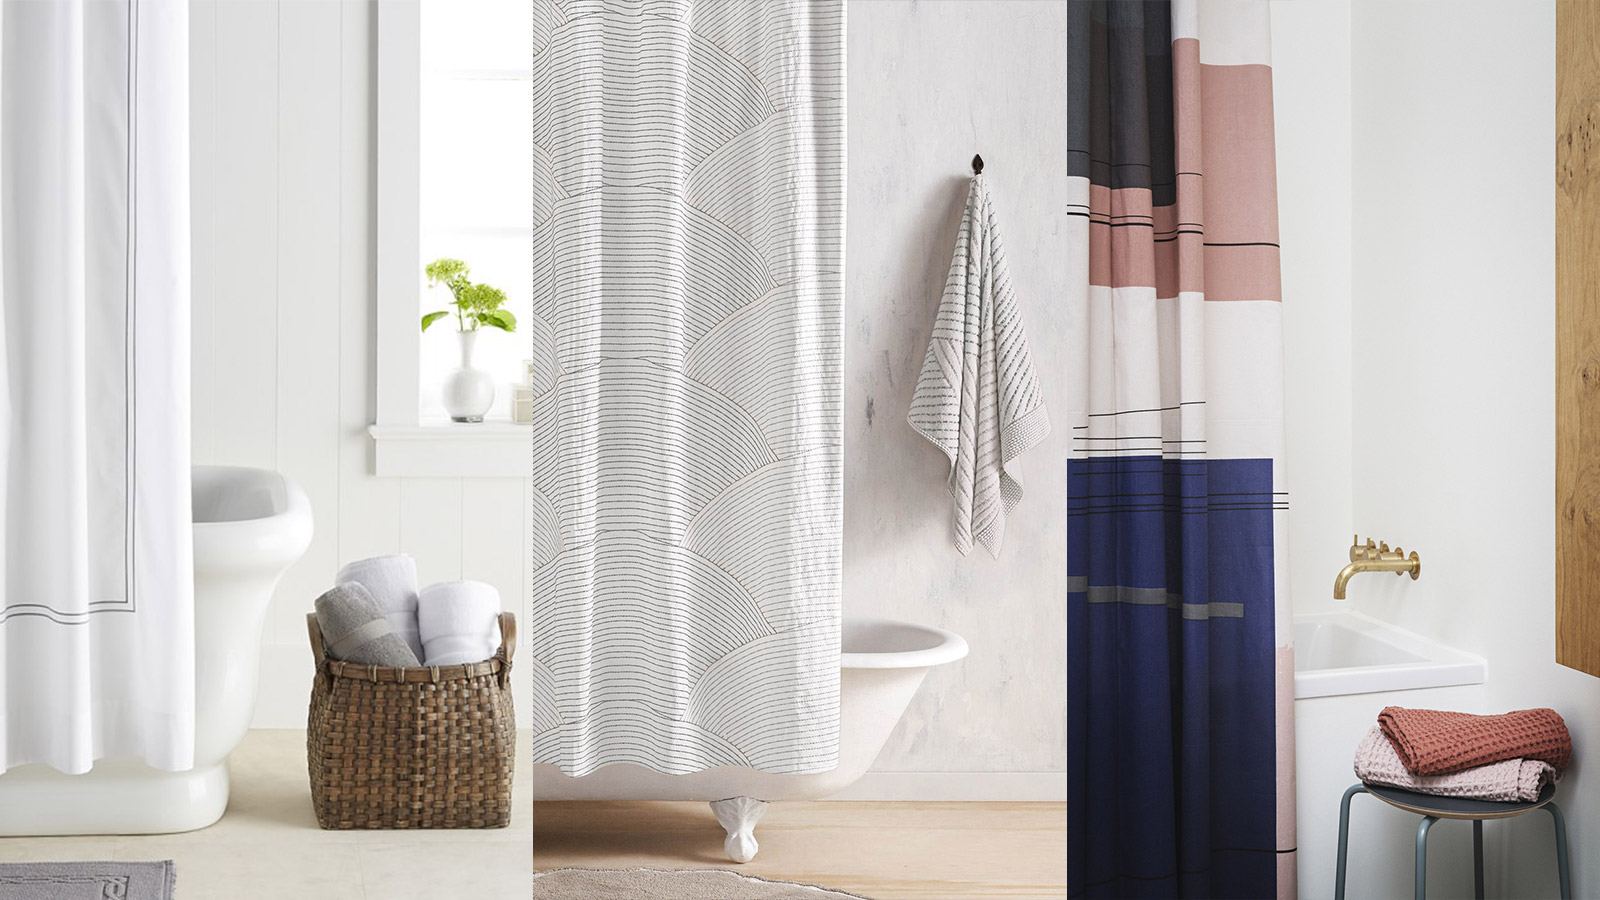 10 Stylish Shower Curtains For A Modern, Photos Of Bathrooms With Shower Curtains